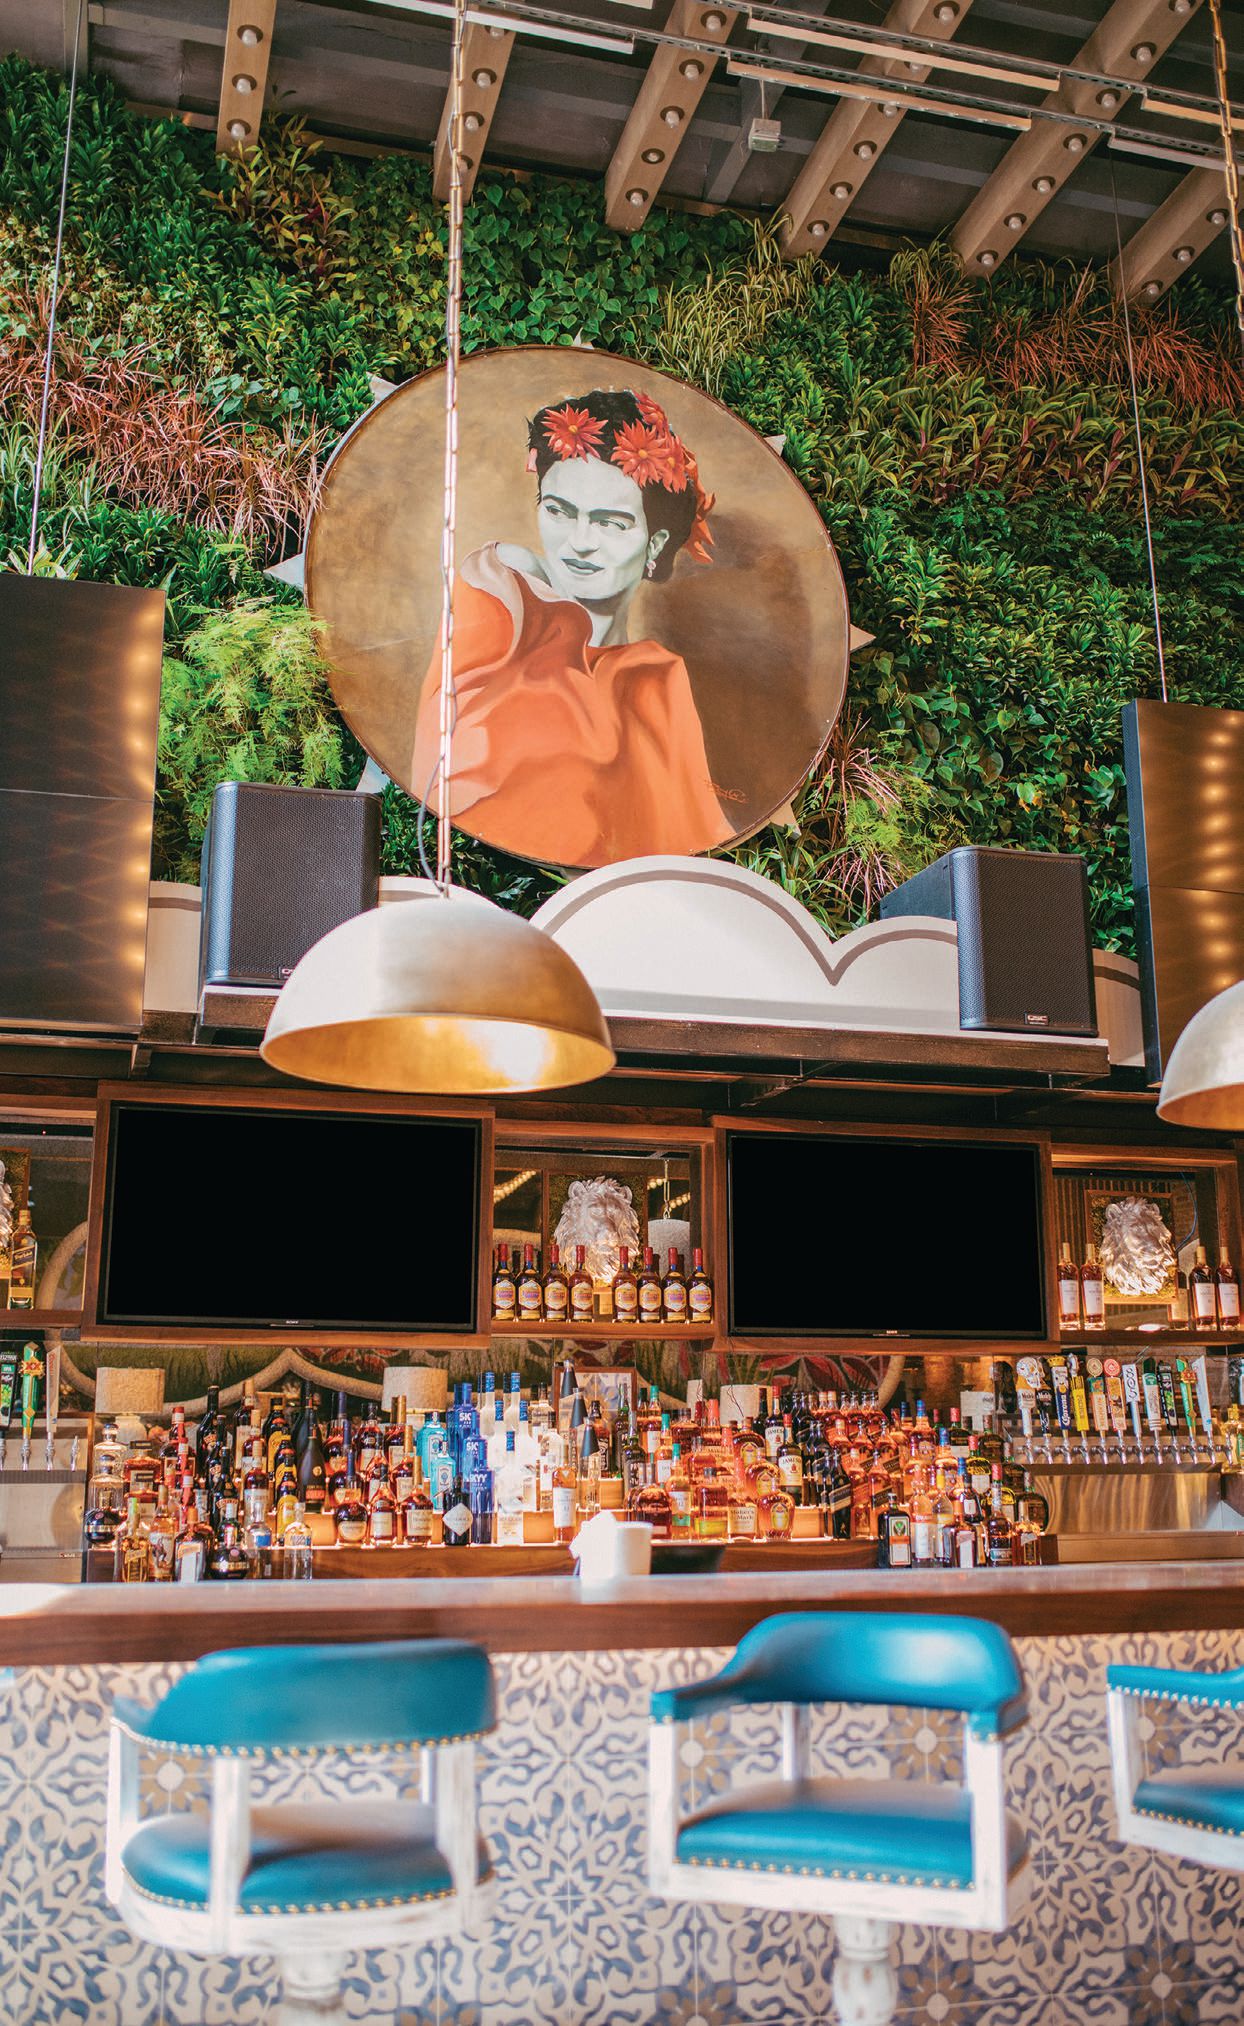 Frida Kahlo watches over diners at Karina’s Cantina in the Gaslamp Quarter. PHOTO COURTESY OF KARINA’S GROUP